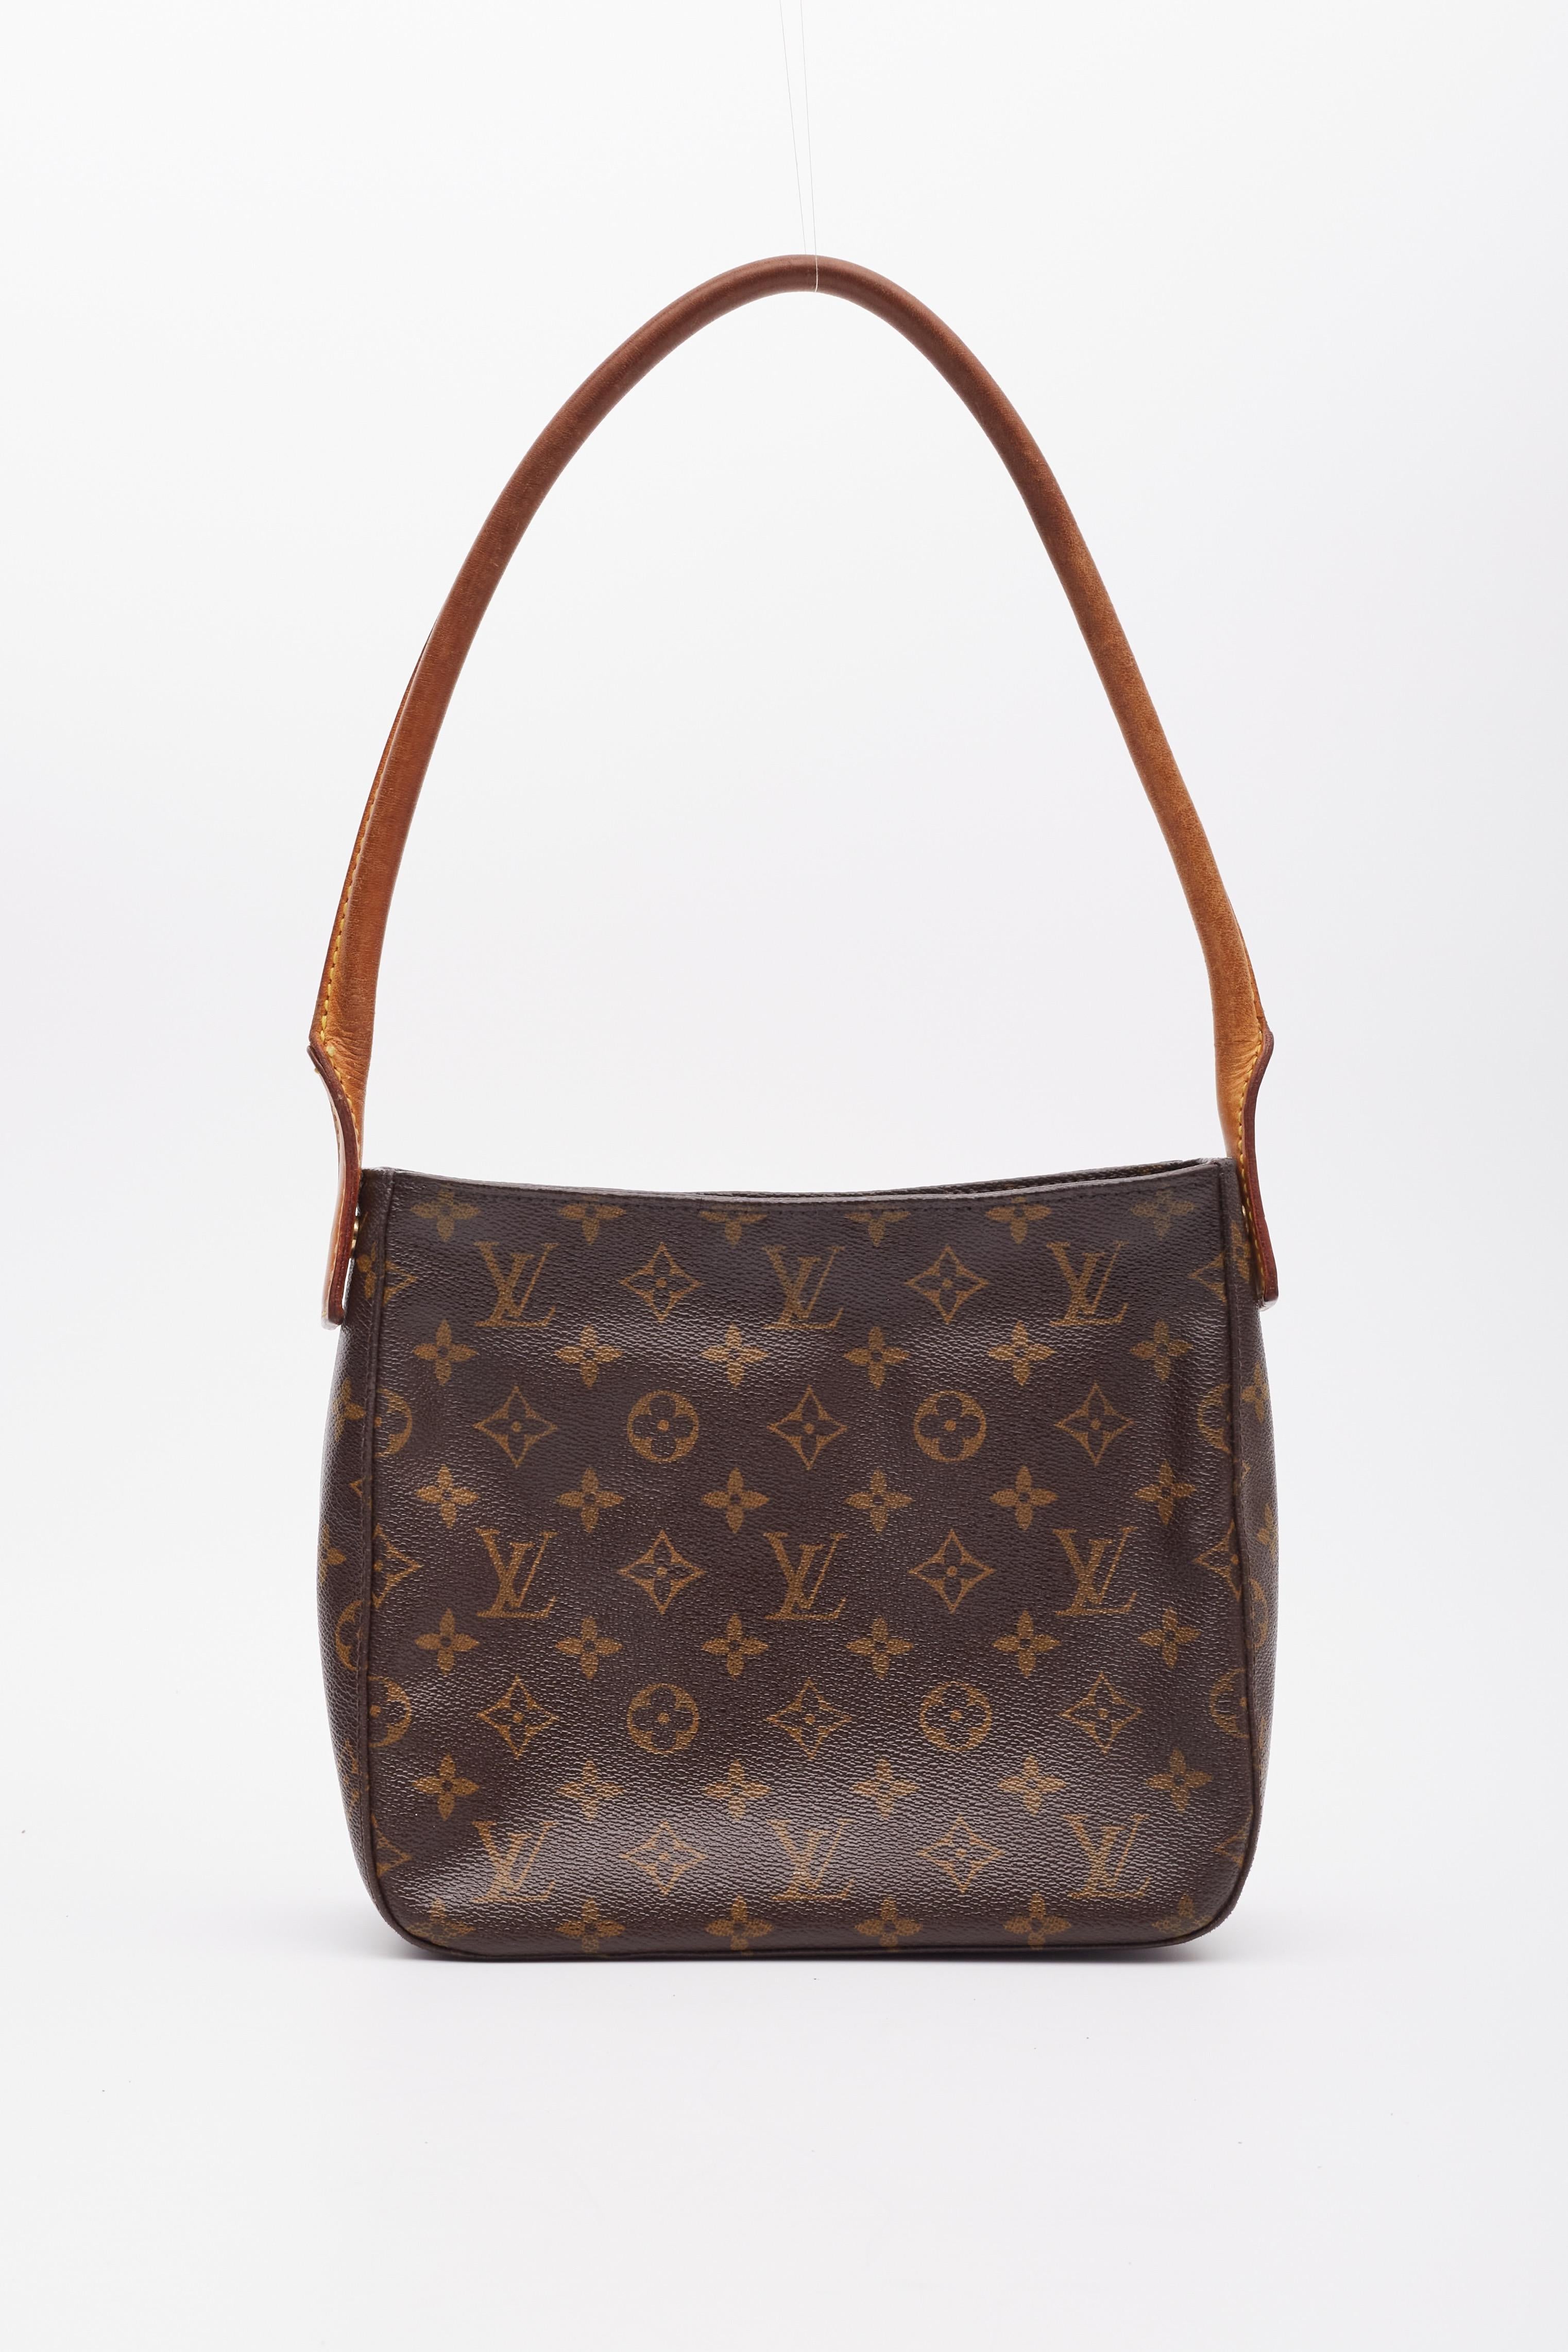 Louis Vuitton Monogram Looping Bag Mm In Good Condition For Sale In Montreal, Quebec